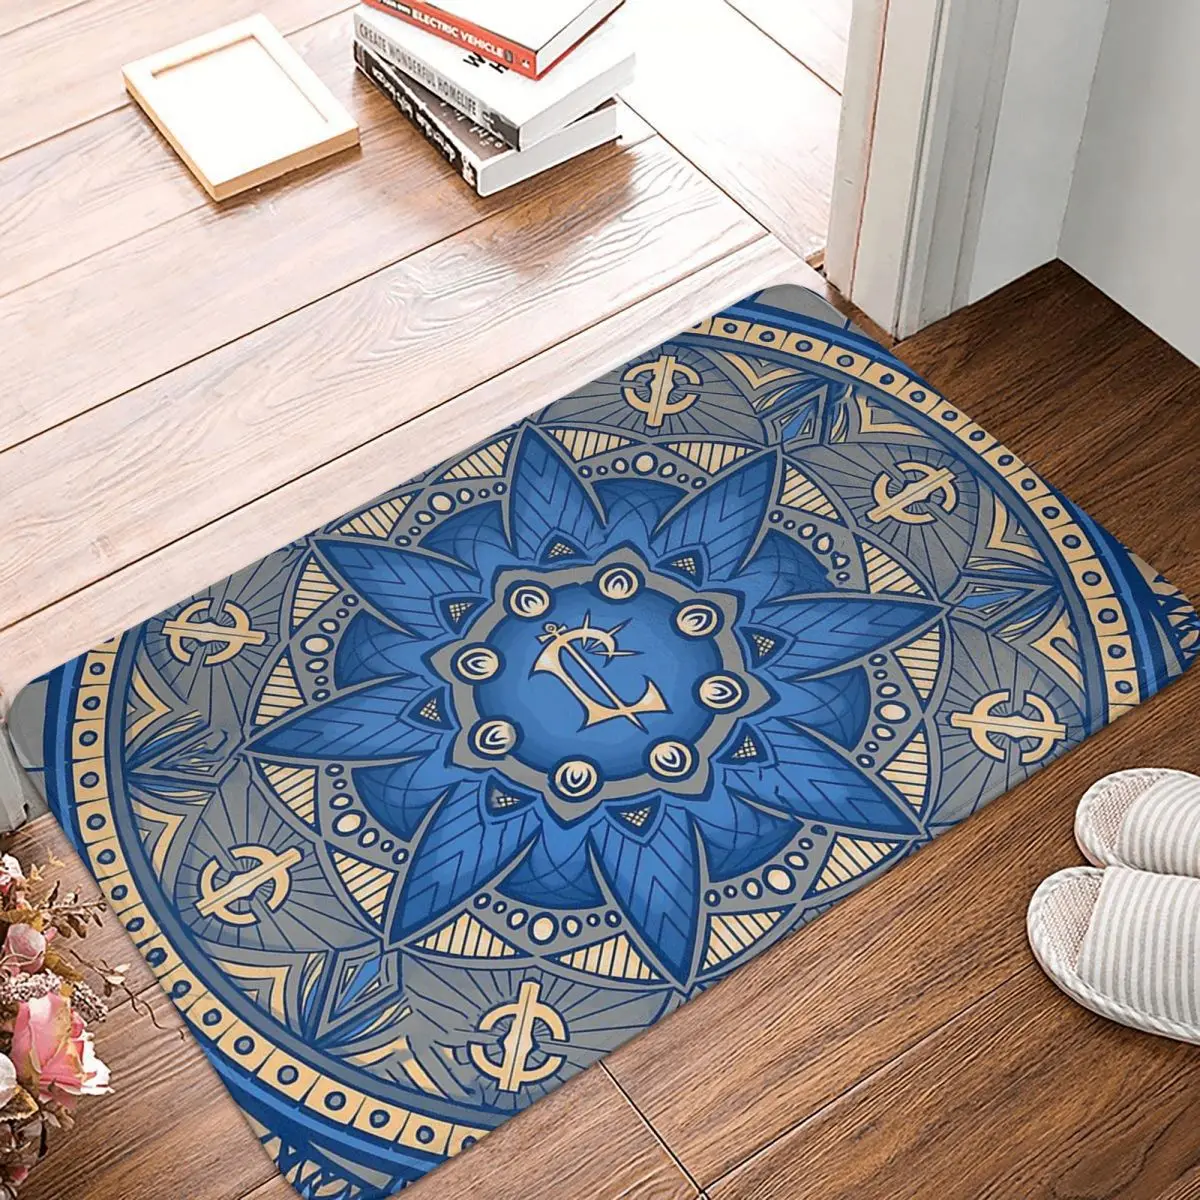 

World of Warcraft Role Playing Game Bedroom Mat Lordaeron Crest Doormat Flannel Carpet Balcony Rug Home Decor